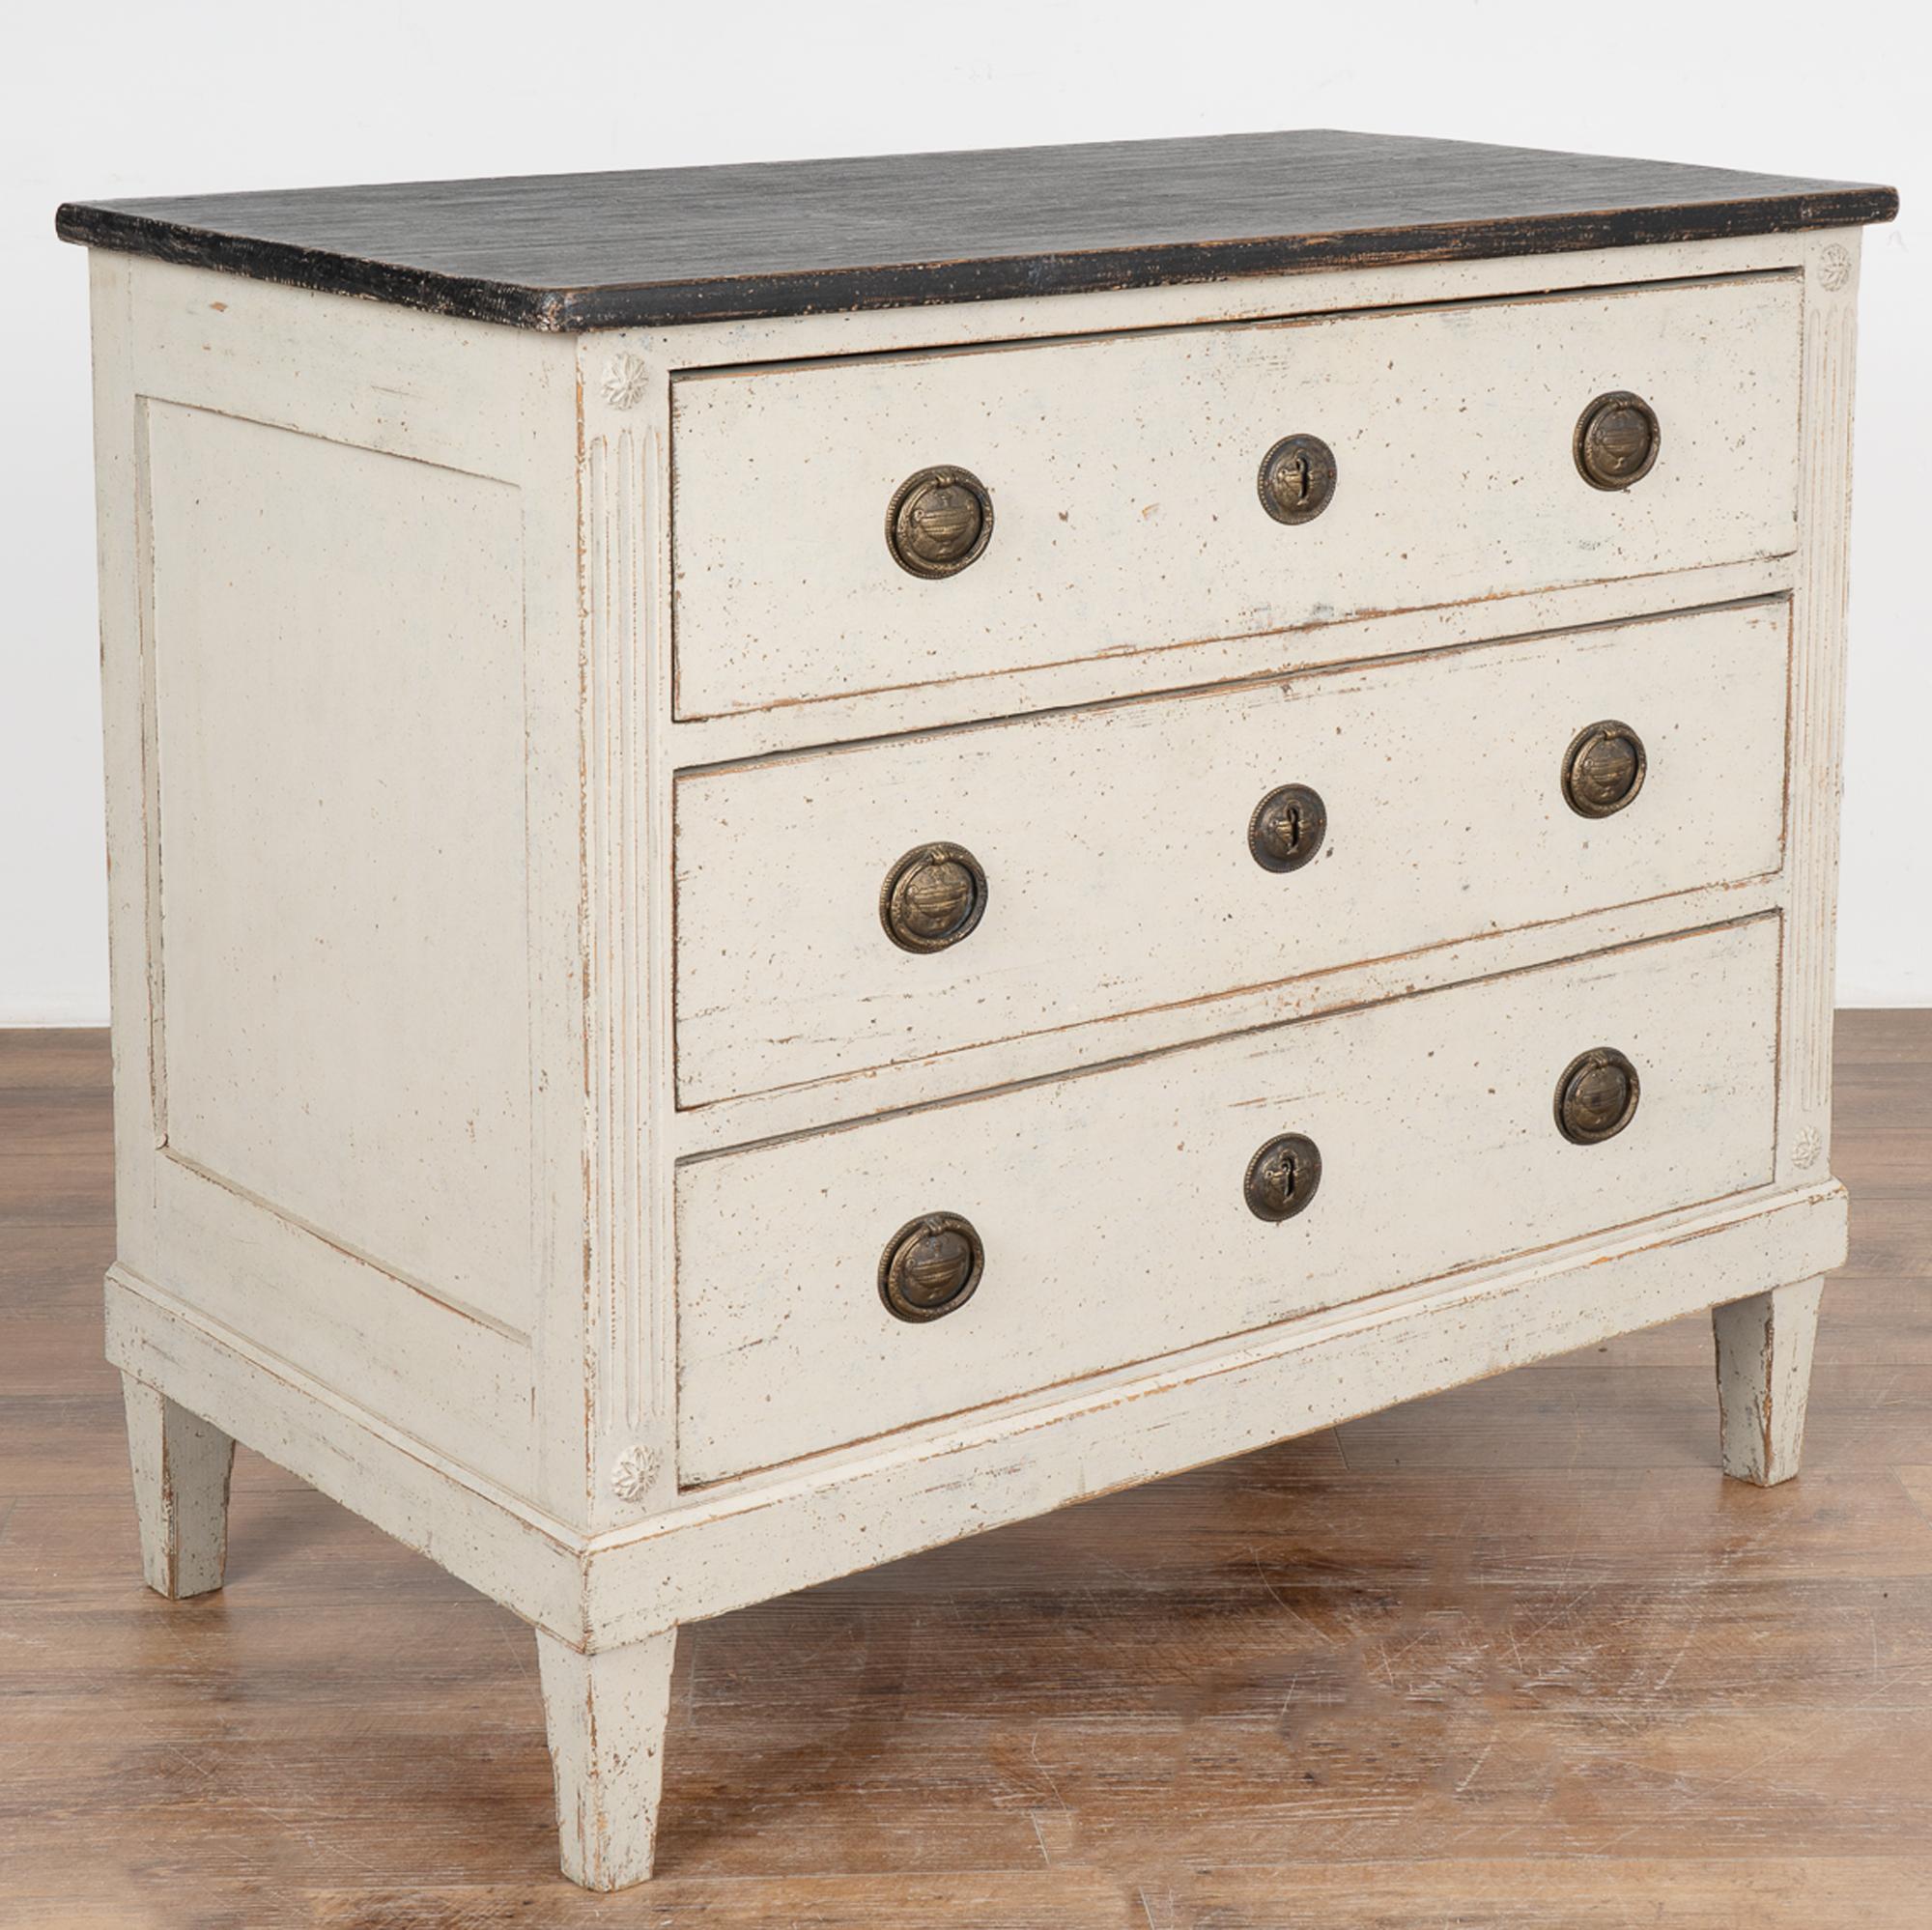 Gustavian style gray painted pine chest of three drawers with contrasting black painted top.
Newer professionally applied and layered gray painted finish, lightly distressed to fit age and grace of this lovely chest.
Sides have simple fluted